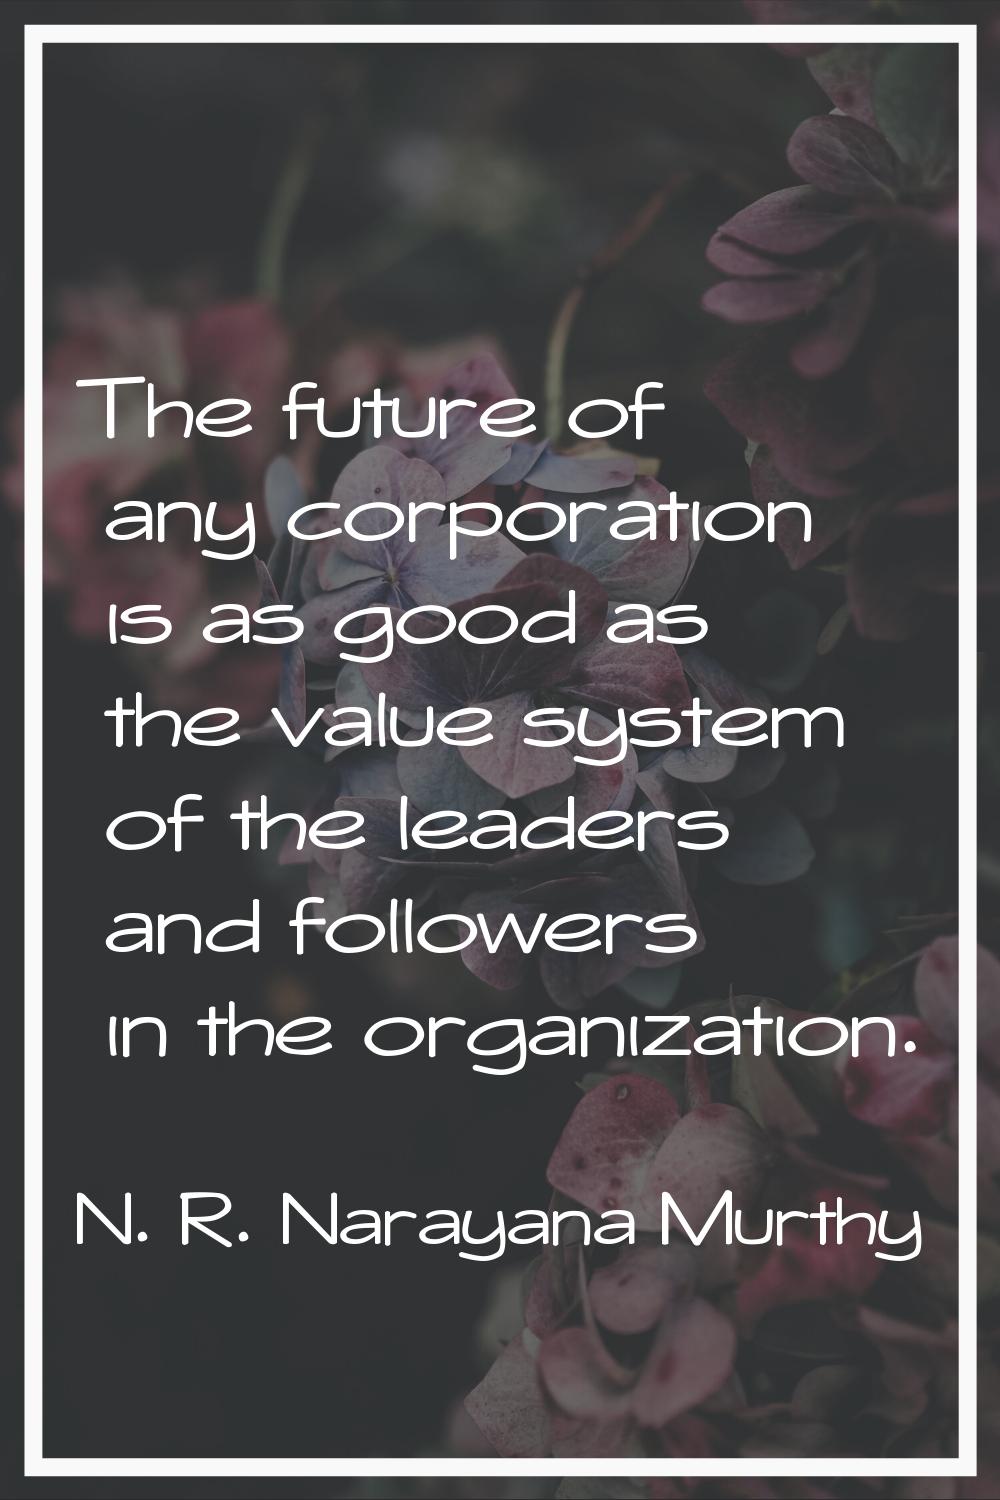 The future of any corporation is as good as the value system of the leaders and followers in the or